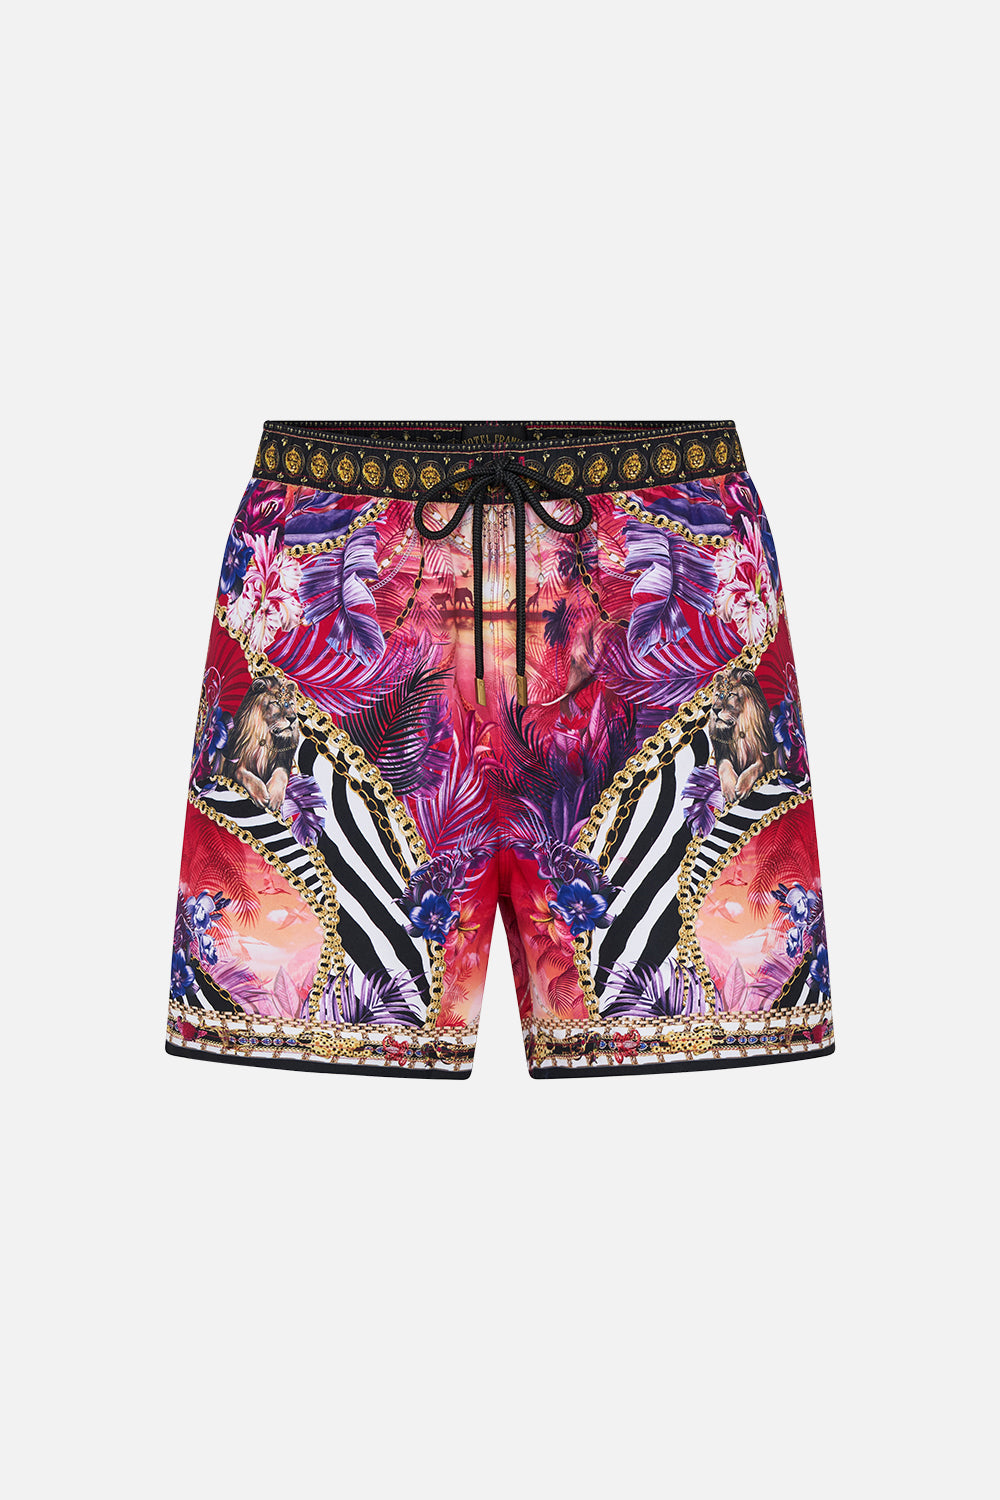 Product view of Hotel Franks by CAMILLA mens tropical print boardshorts in Wild Loving print